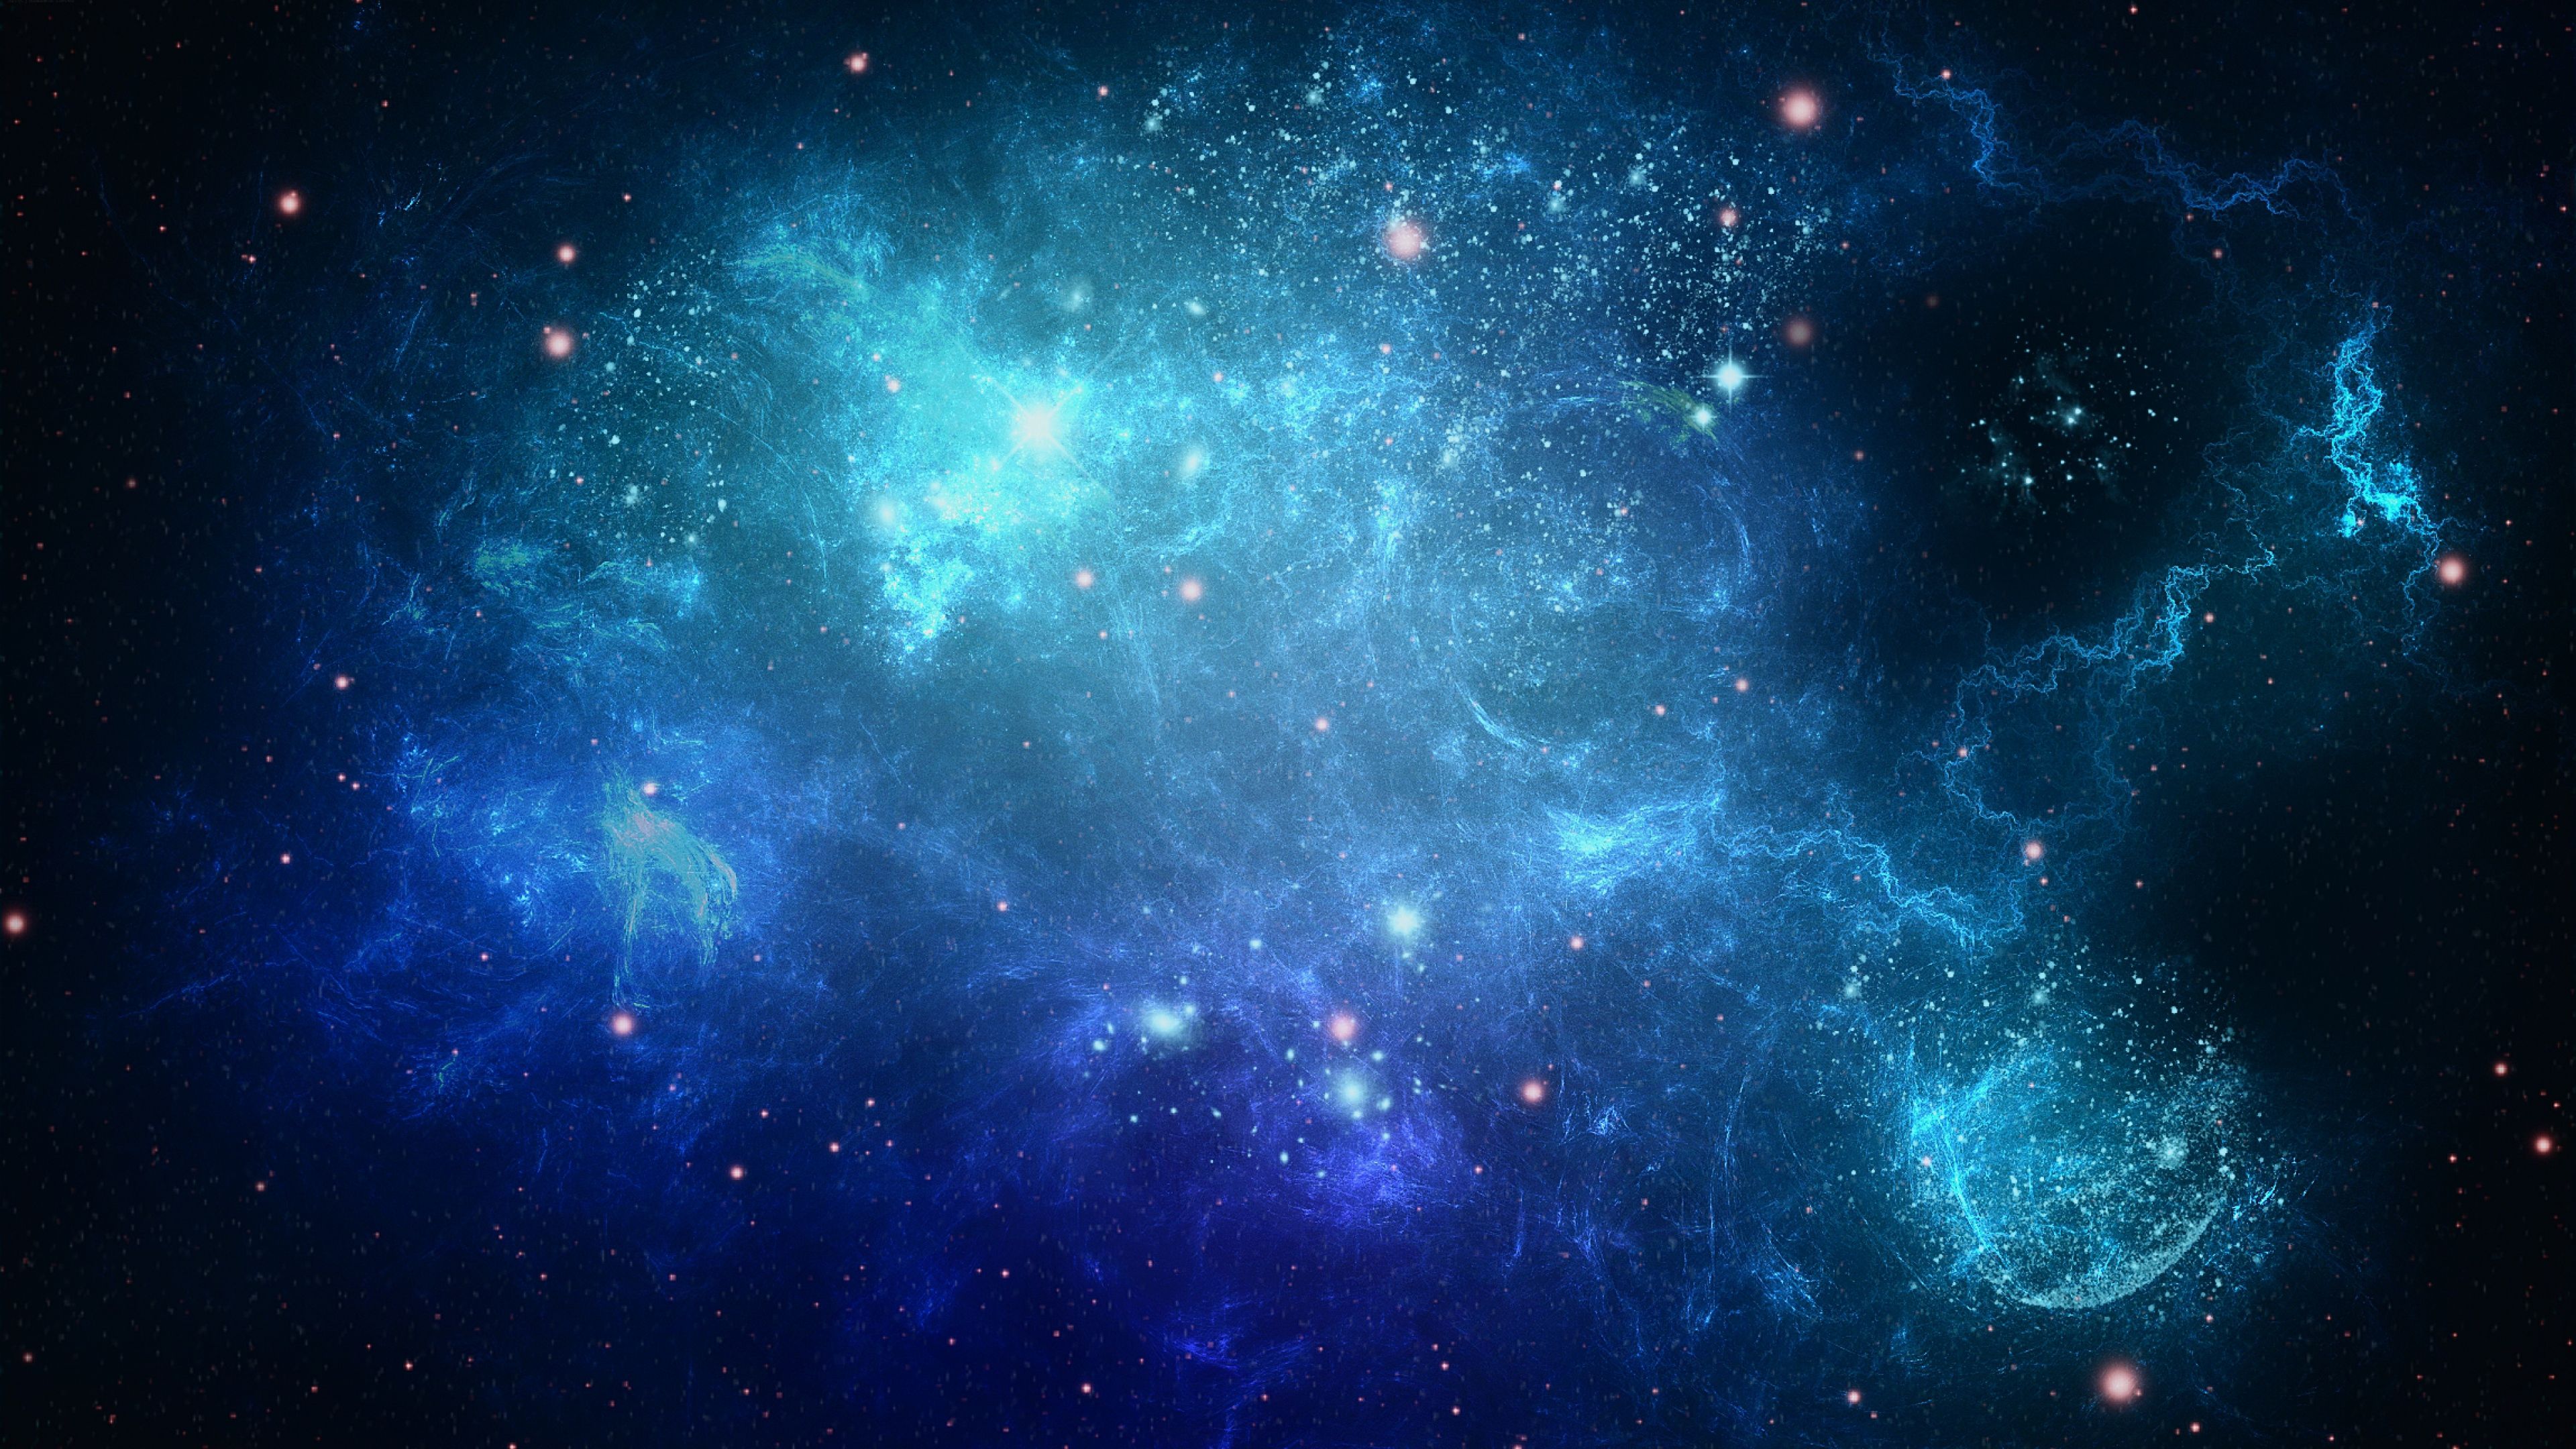 Download Wallpaper 3840x2160 Space, Background, Blue, Dots 4K. Wallpaper space, Wallpaper dekstop, HD space